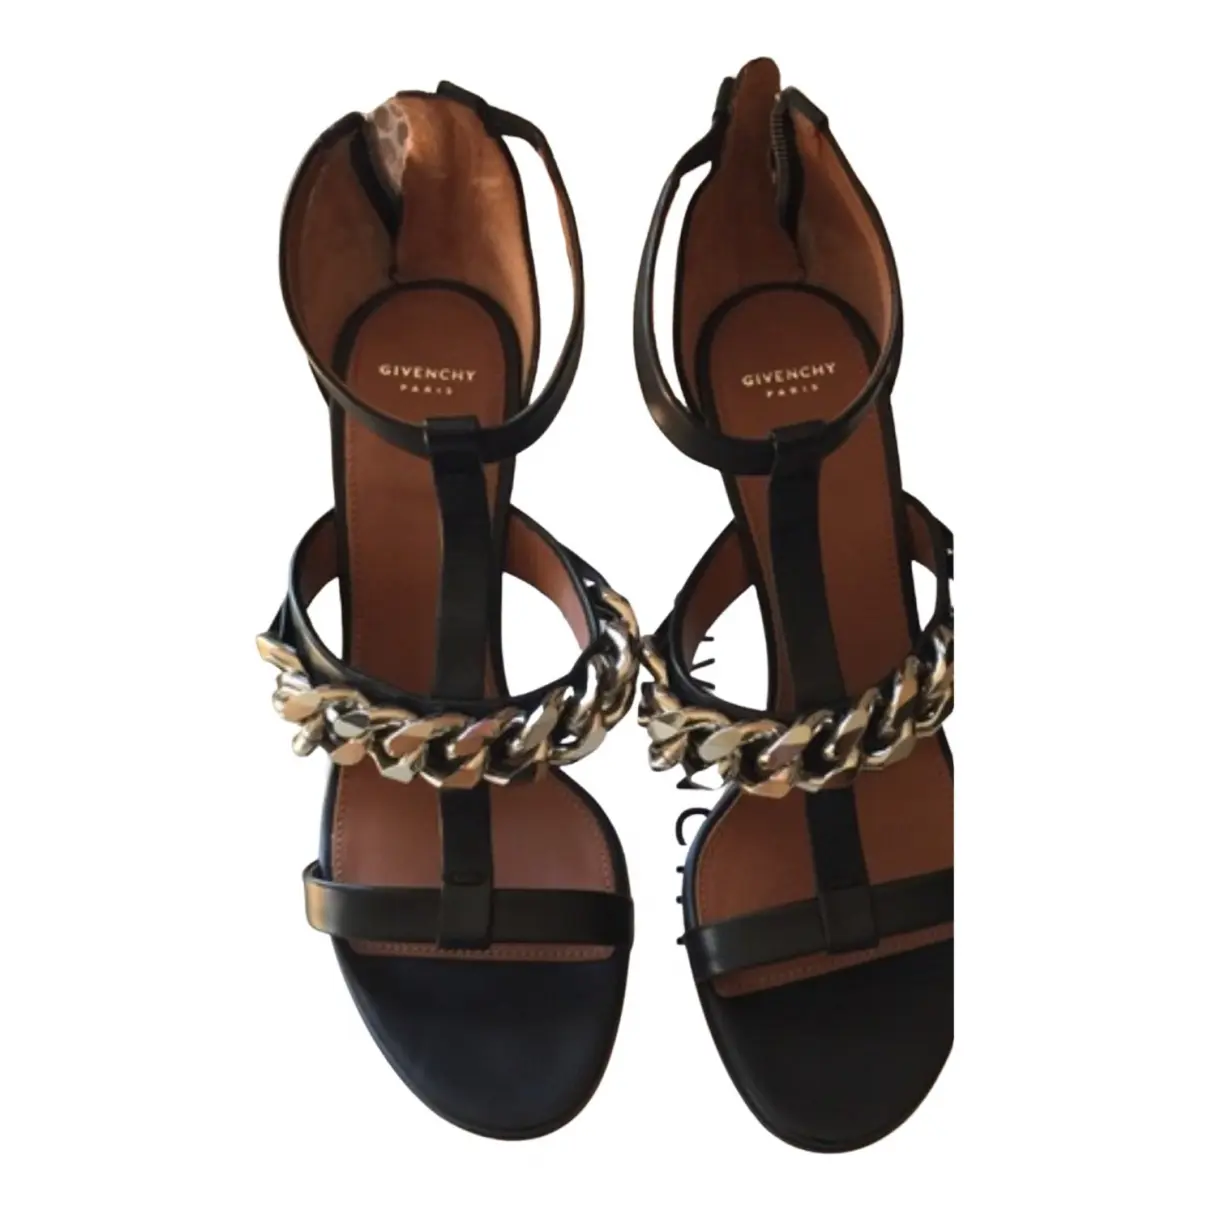 Leather sandals Givenchy